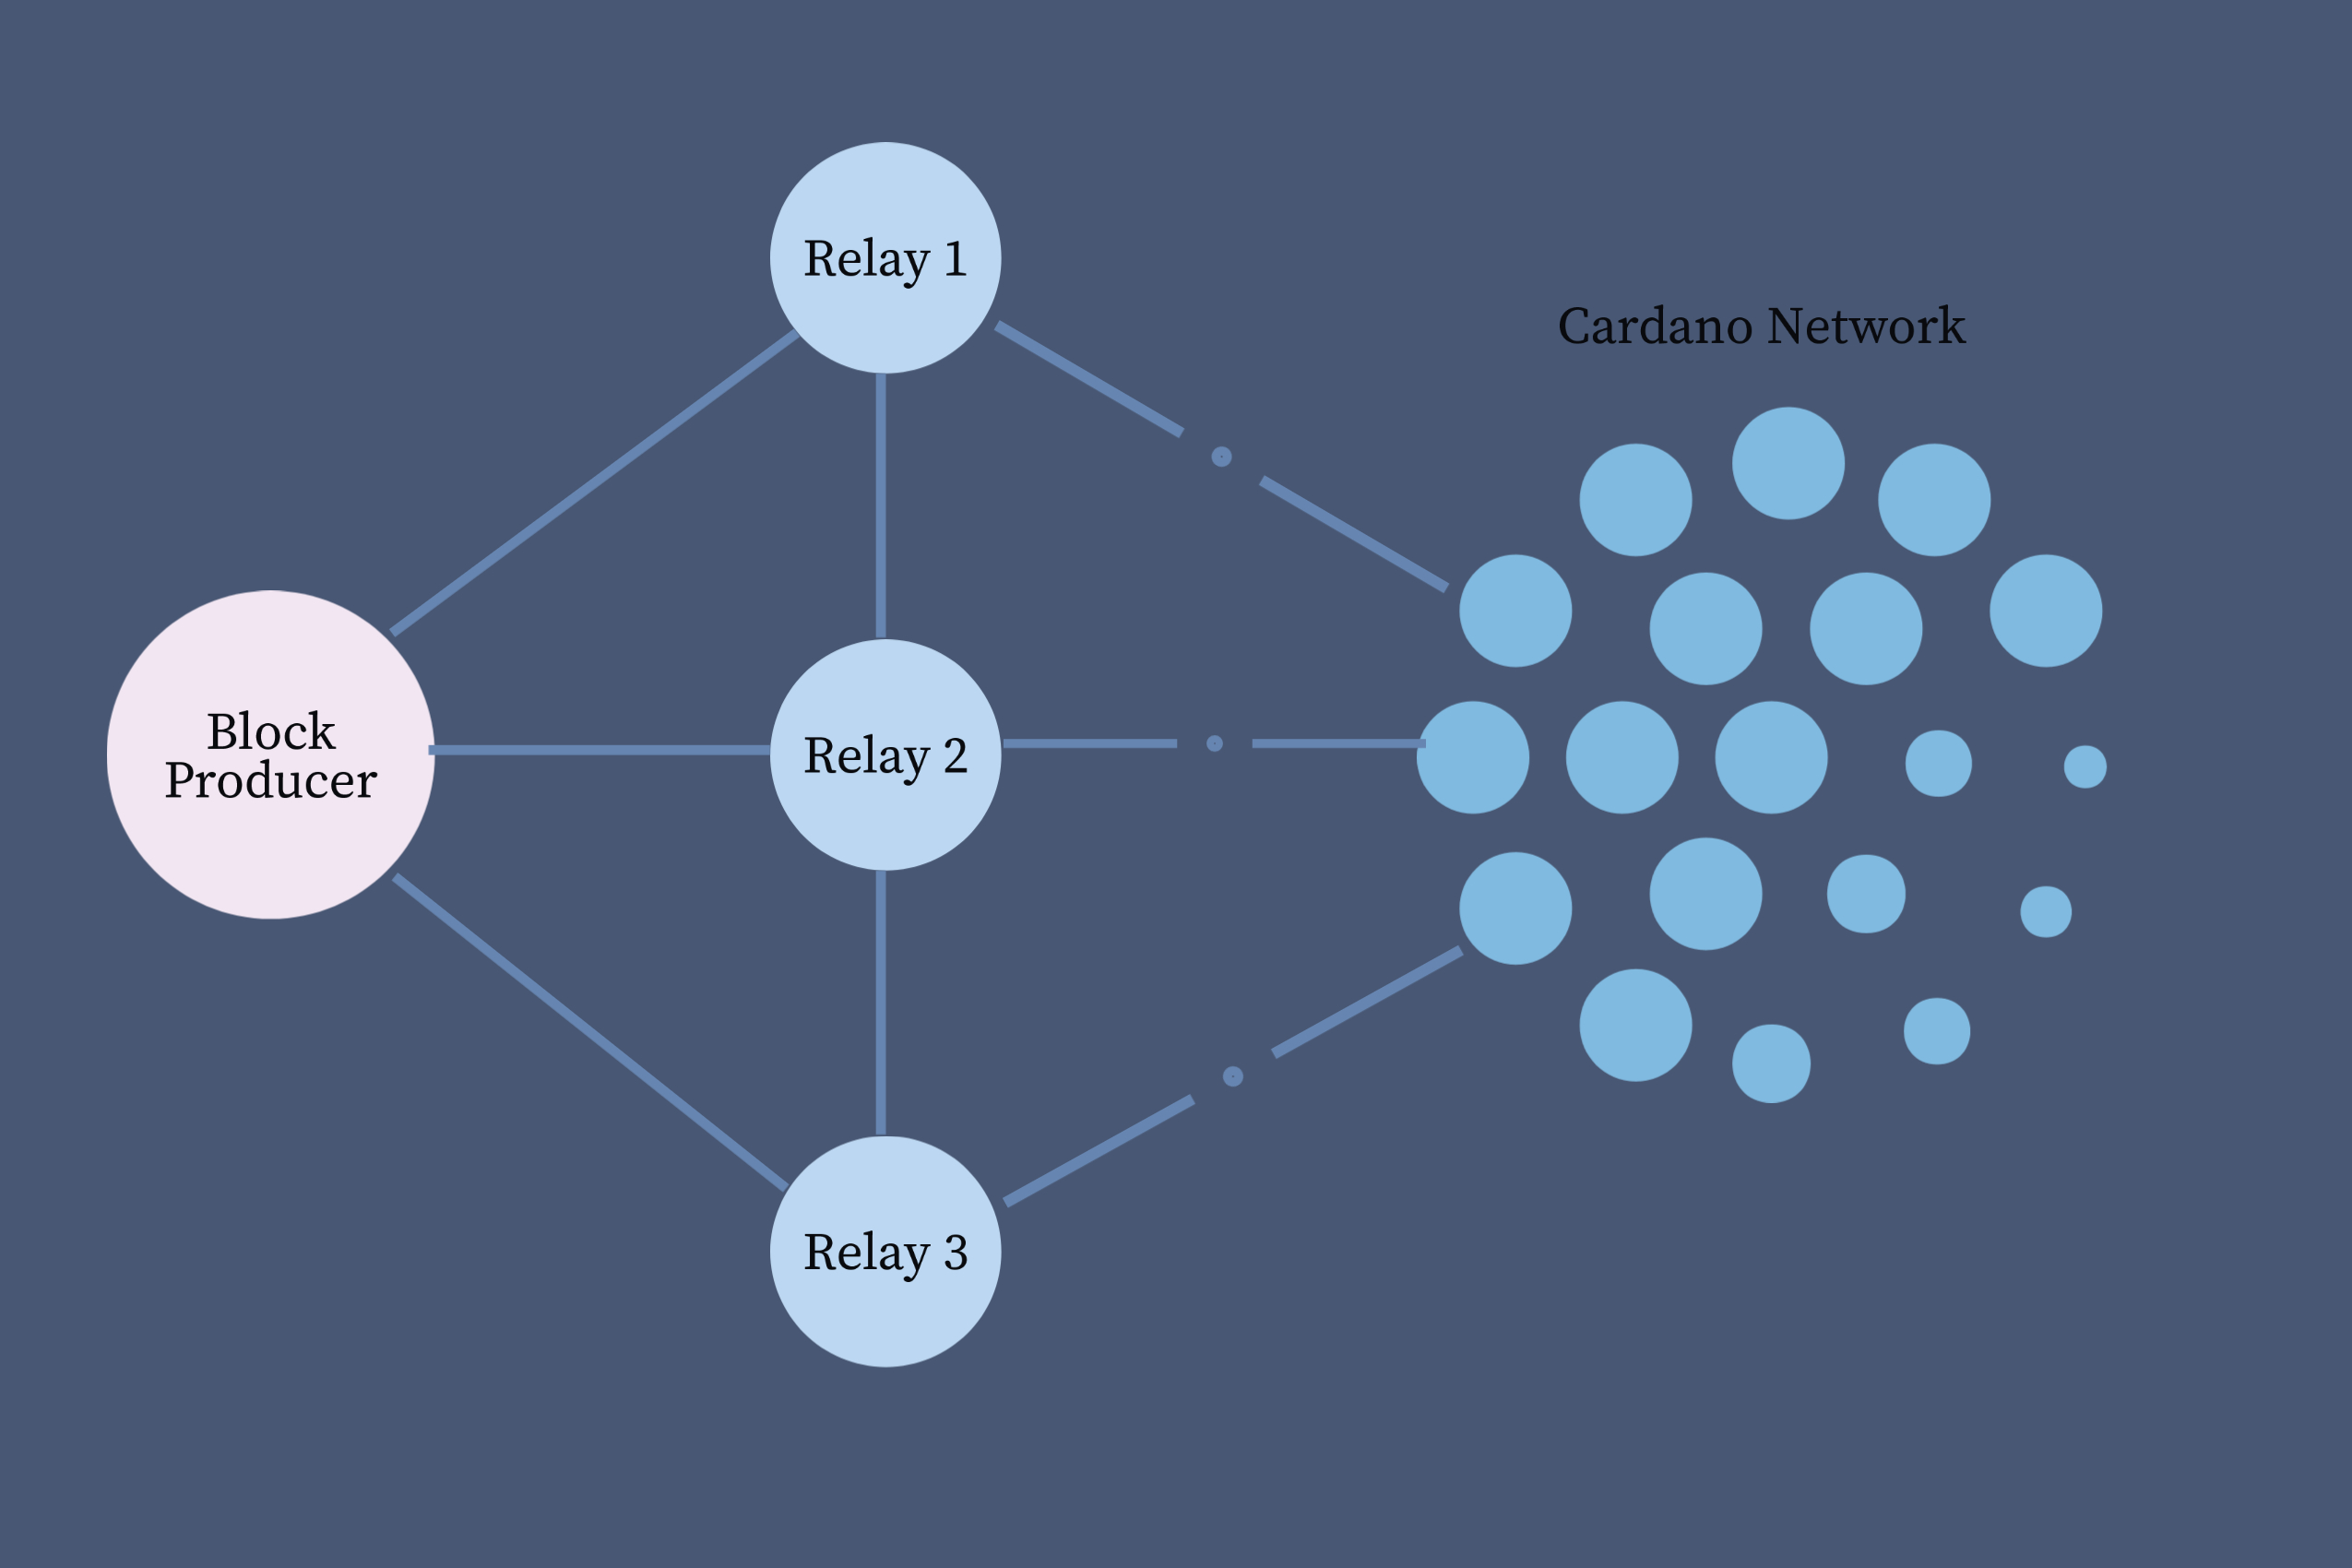 Block producer node is connected with 3 relays. Those relays are connected with the cardano network.